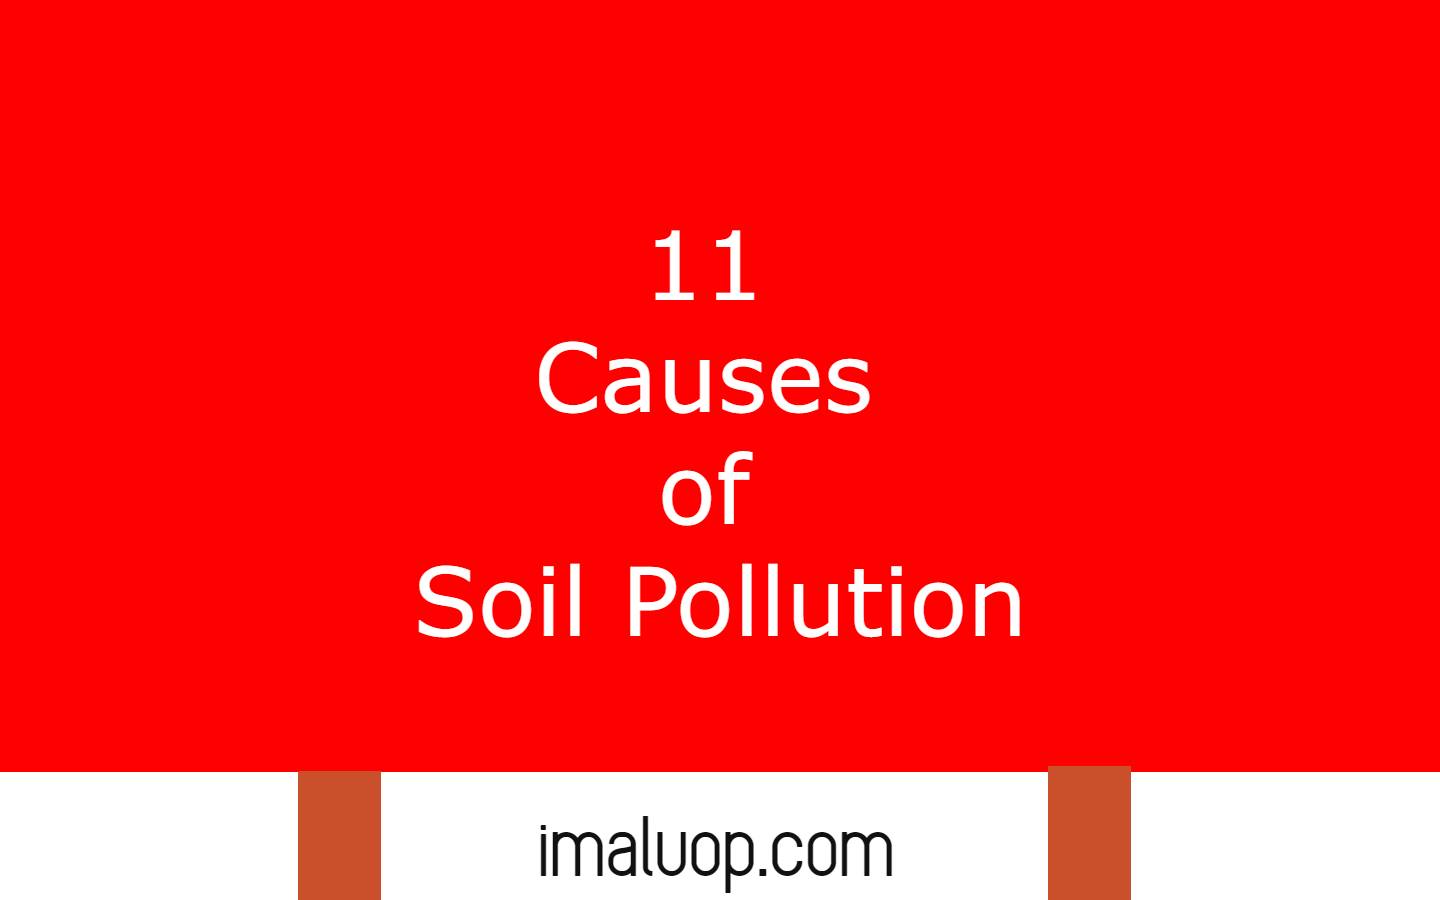 11 Causes of Soil Pollution